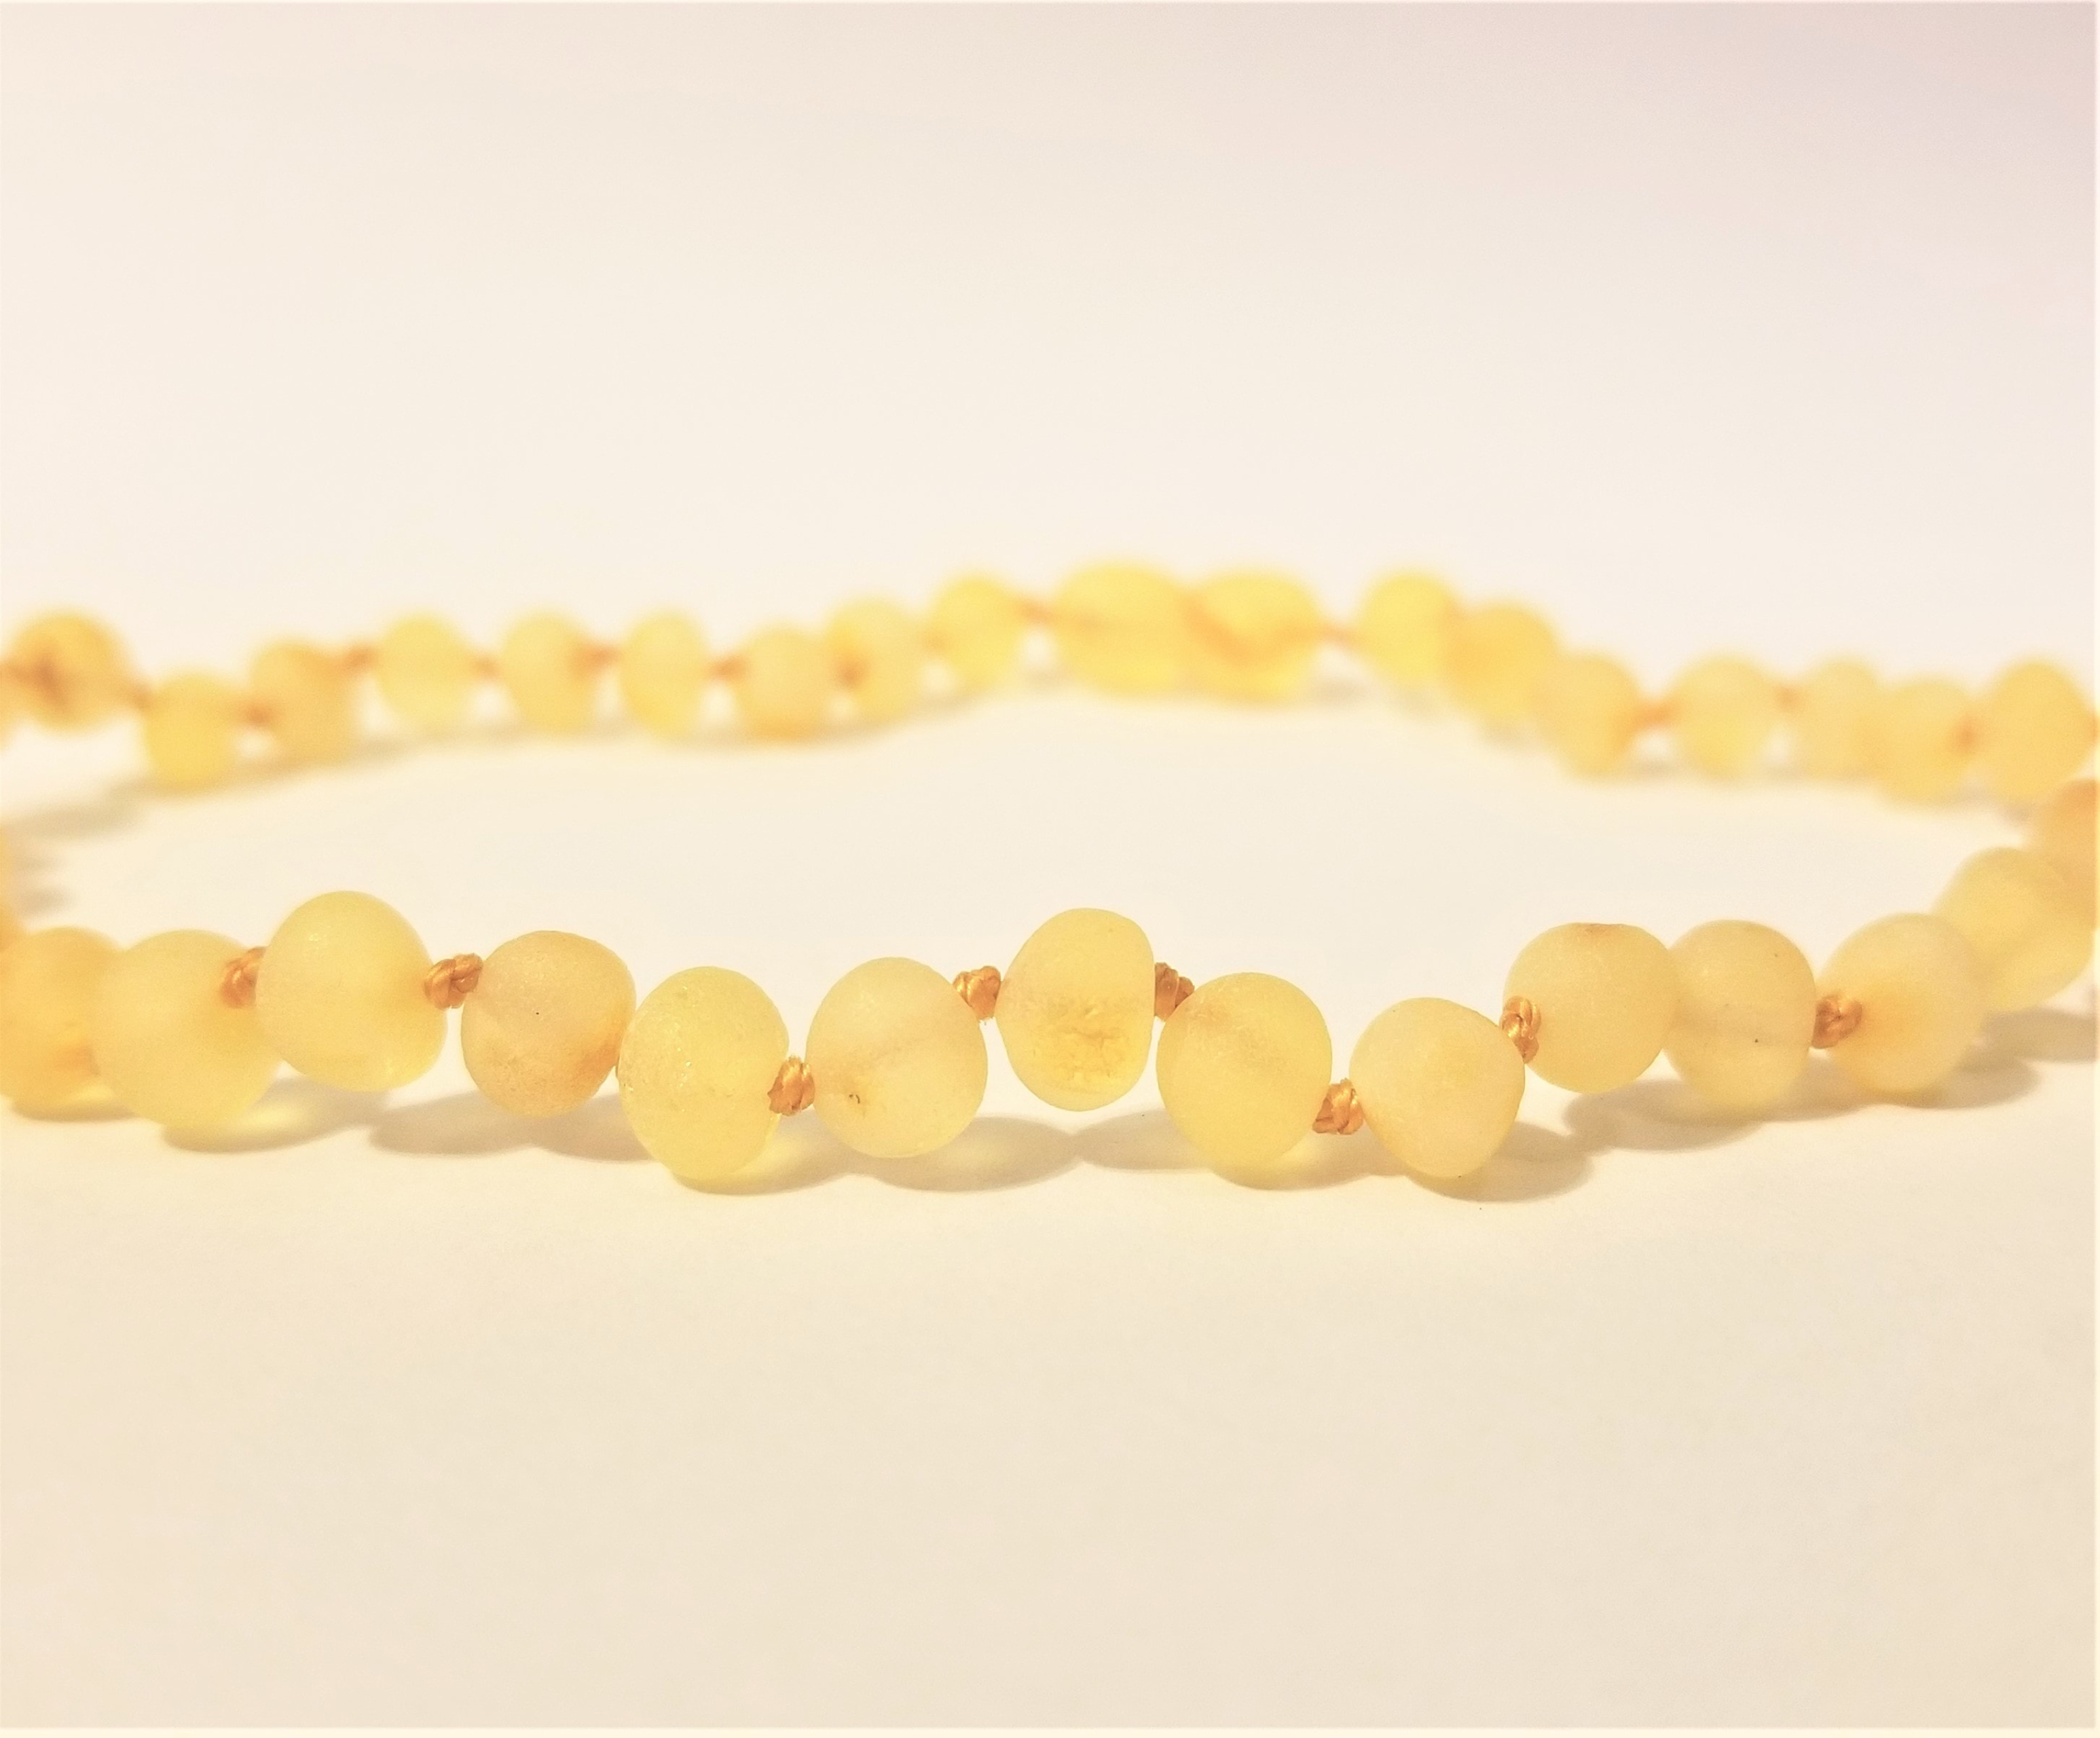 POP CLASP Hand Crafted Baltic Amber Teething Necklace in 3 Sizes Premium Grade Amber Teething Necklace Teething Relief for Baby and Child 14-15 inches, Unpolished Rainbow 